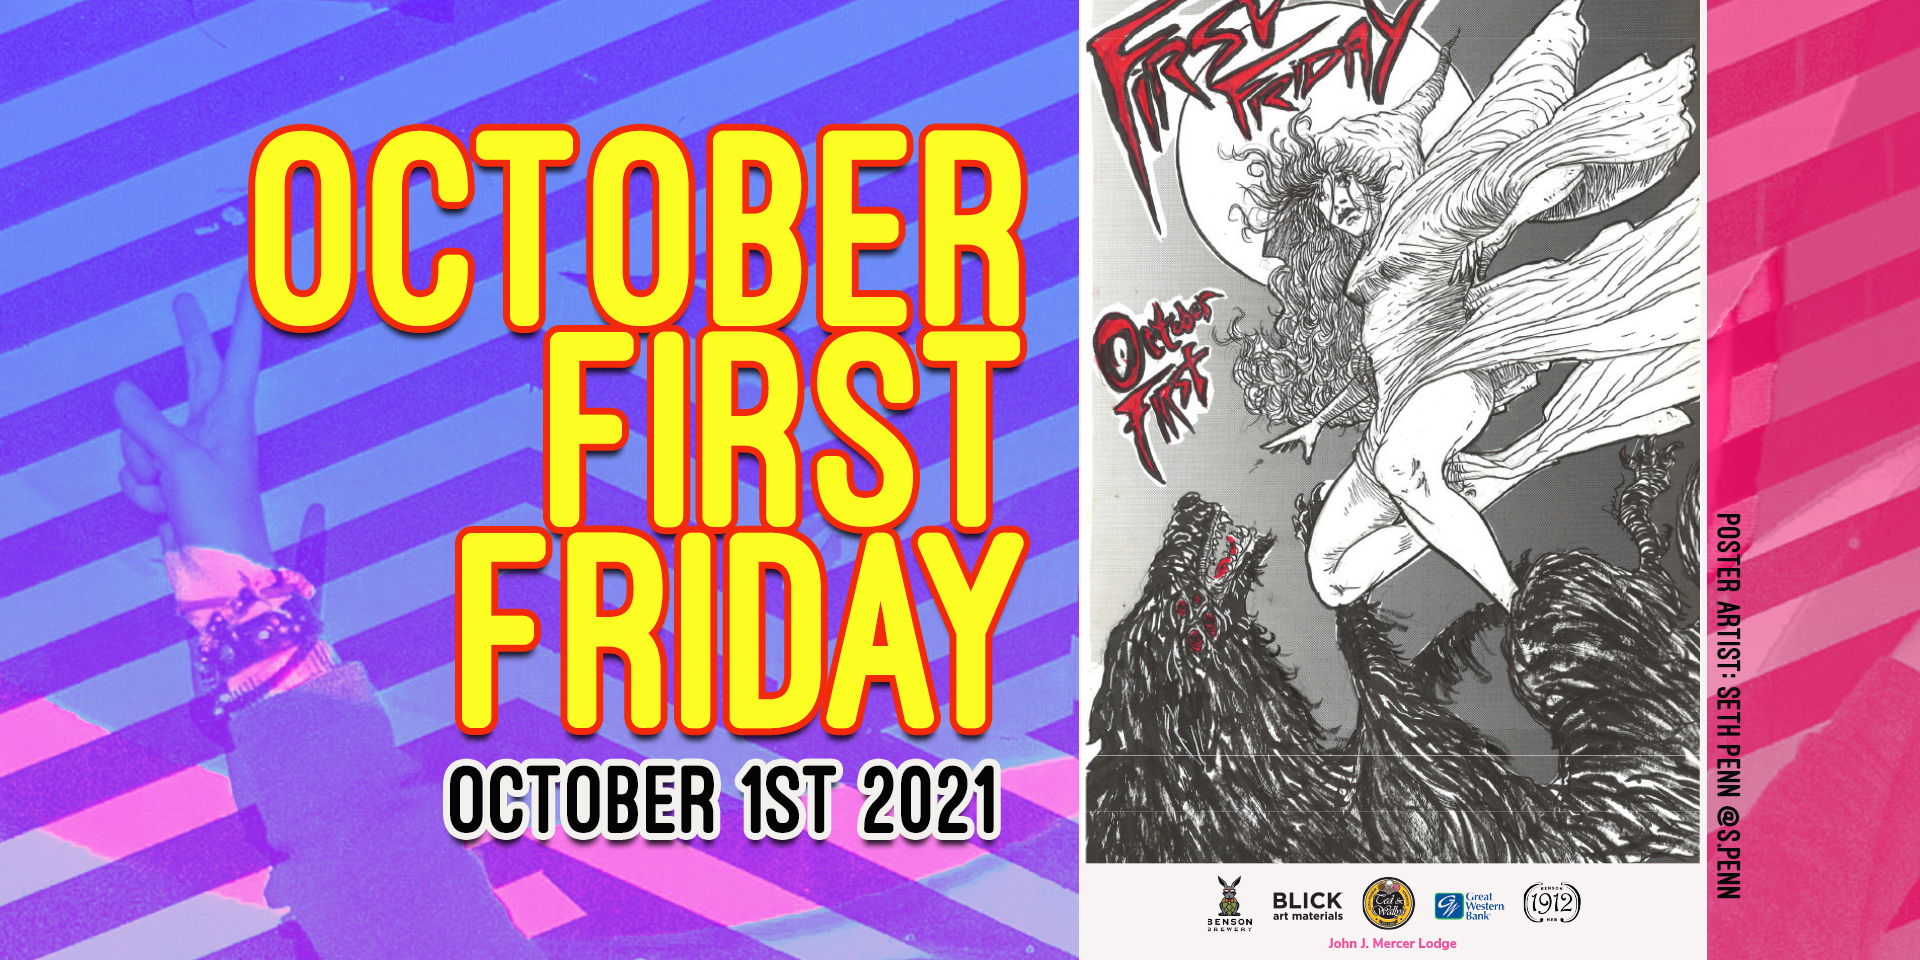 October 1st First Friday promotional image